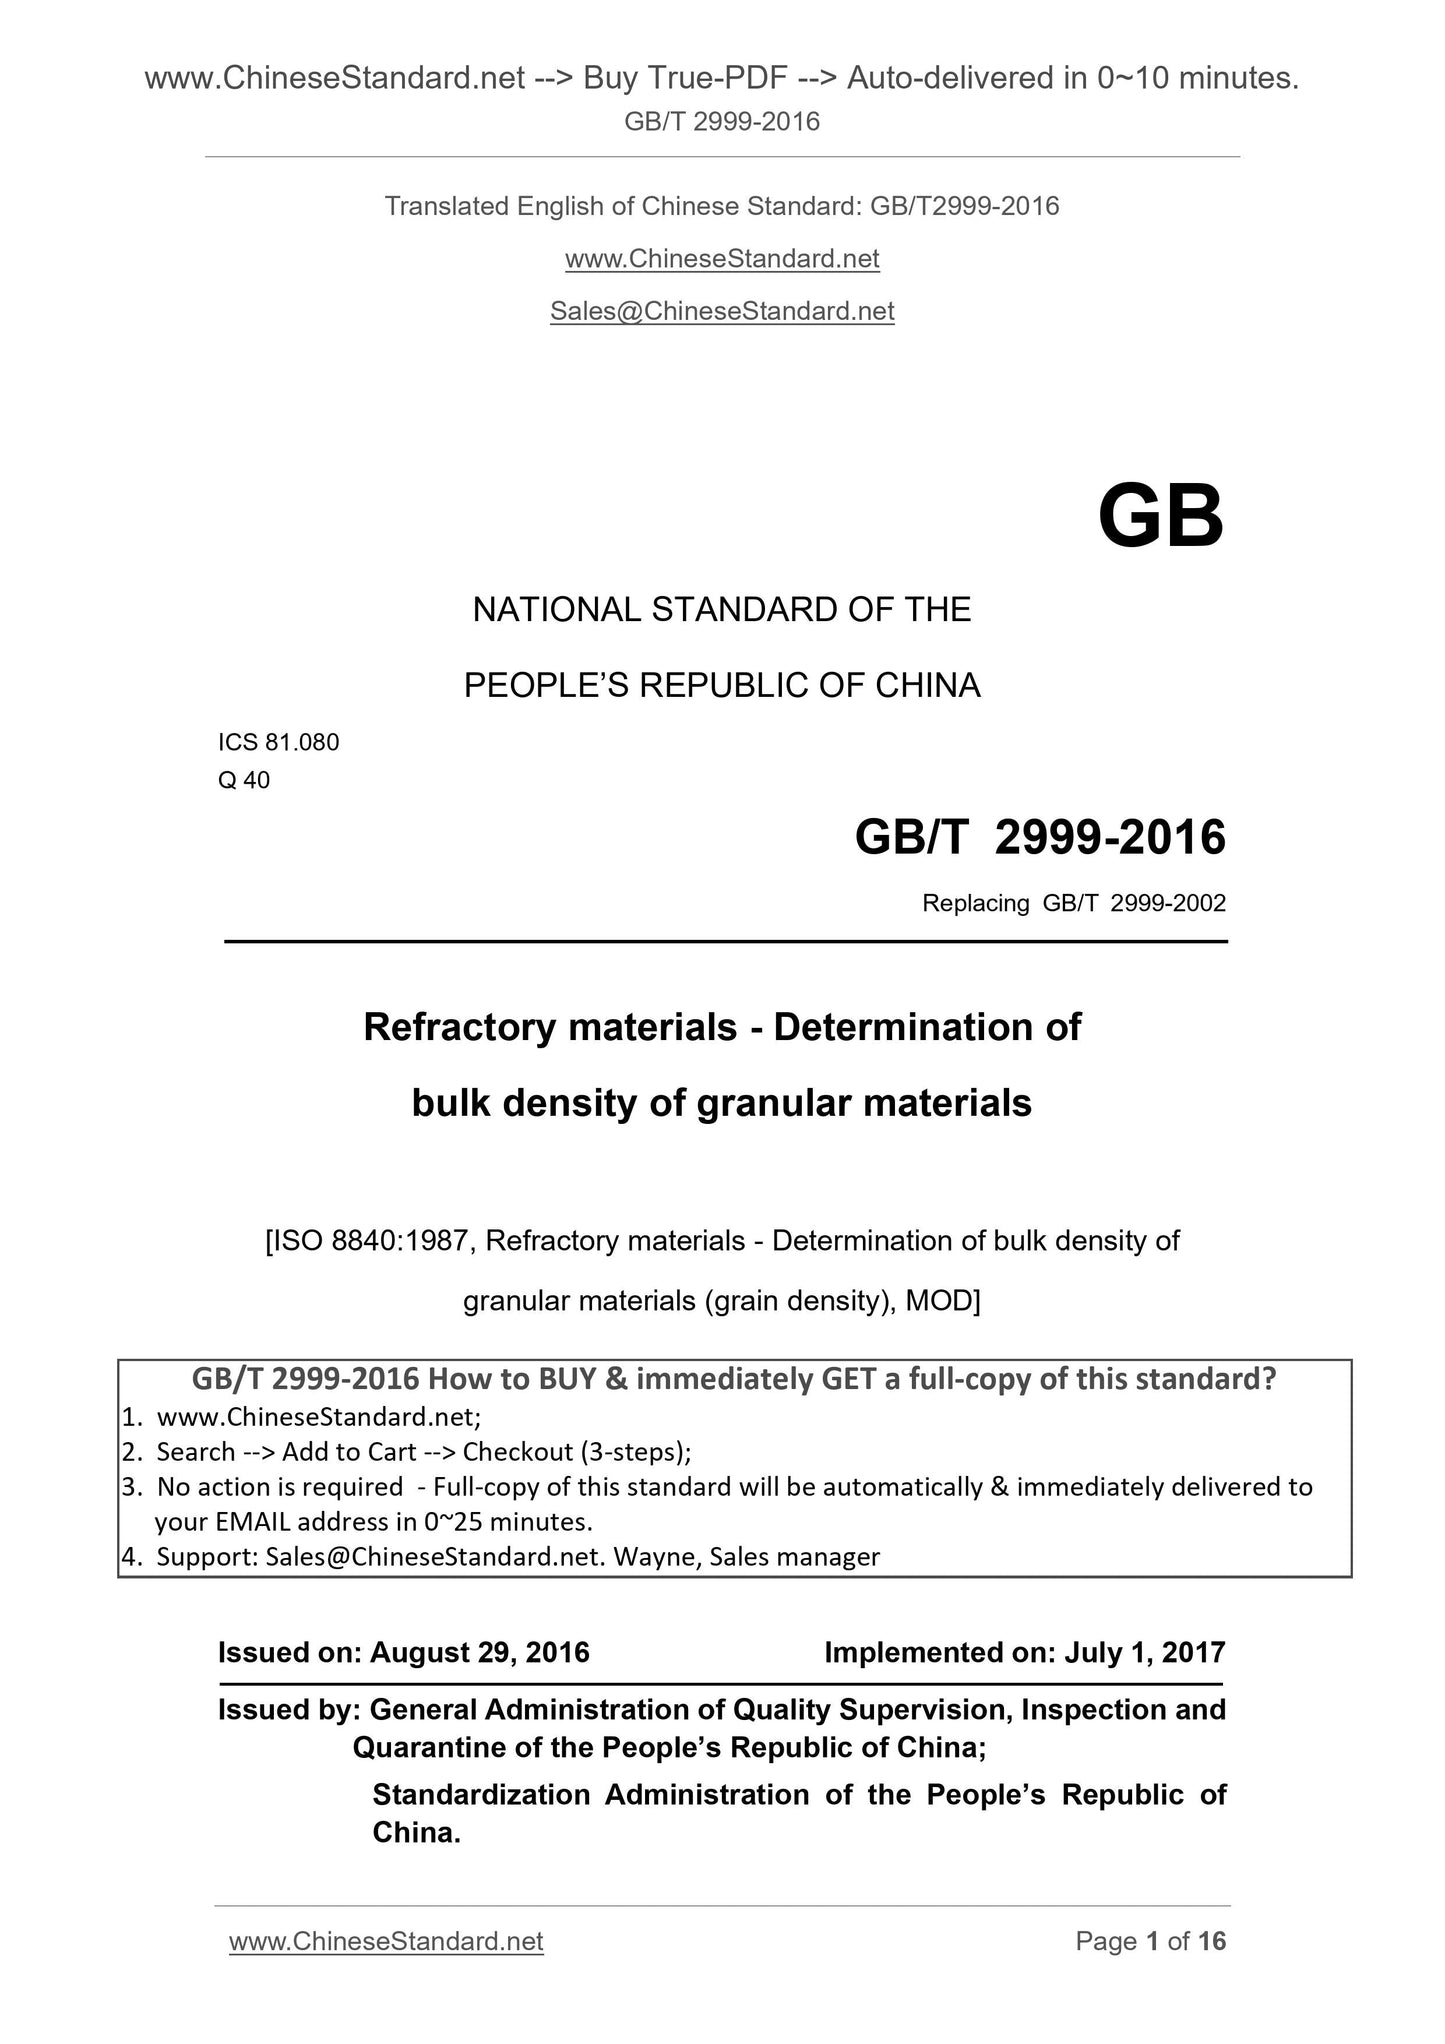 GB/T 2999-2016 Page 1